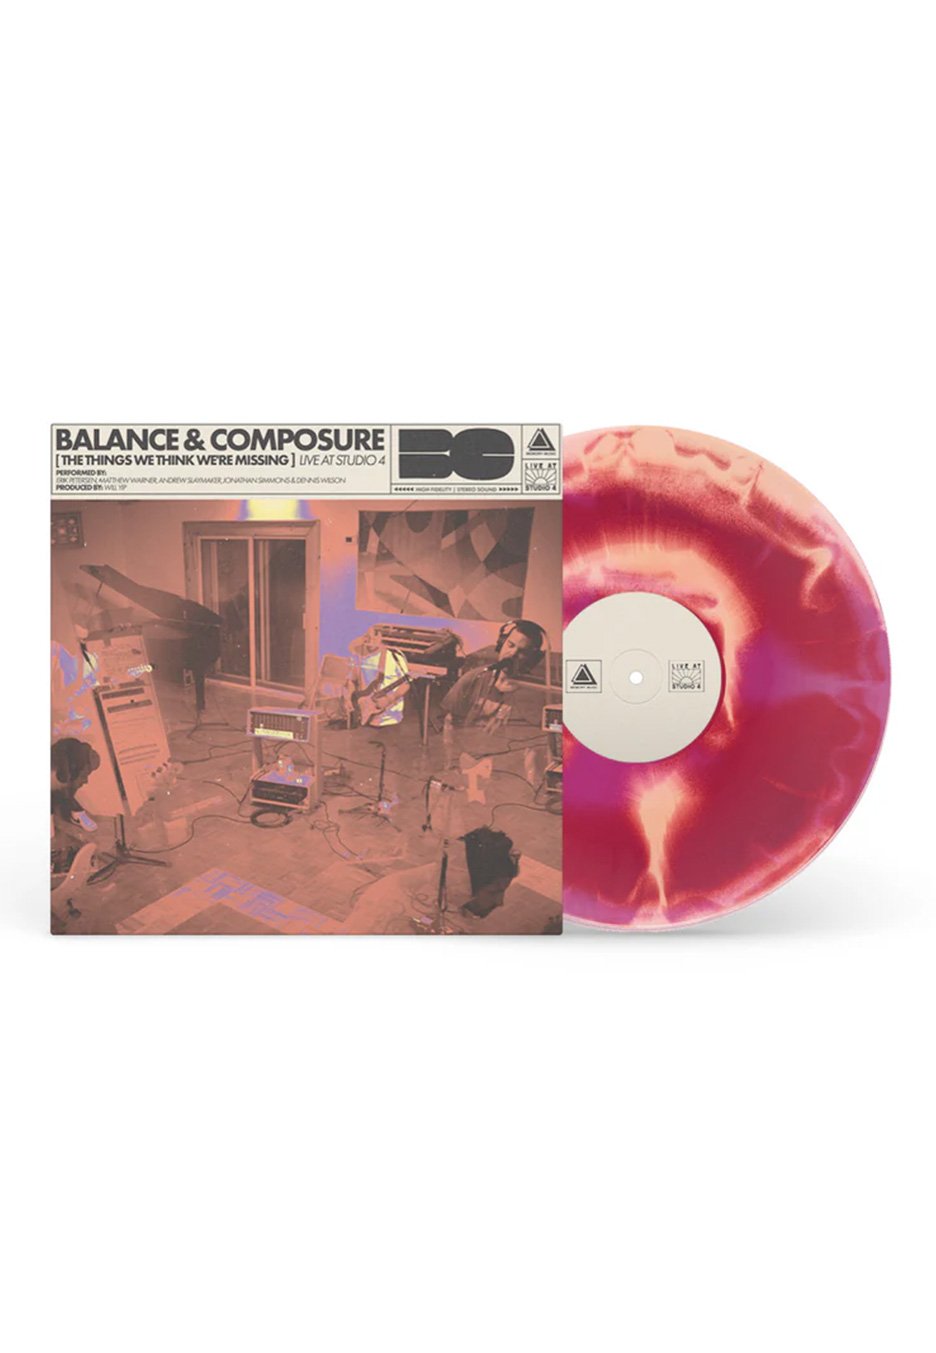 Balance And Composure - The Things We Think We're Missing Live At Studio 4 Purple/Cream Swirl - Colored Vinyl